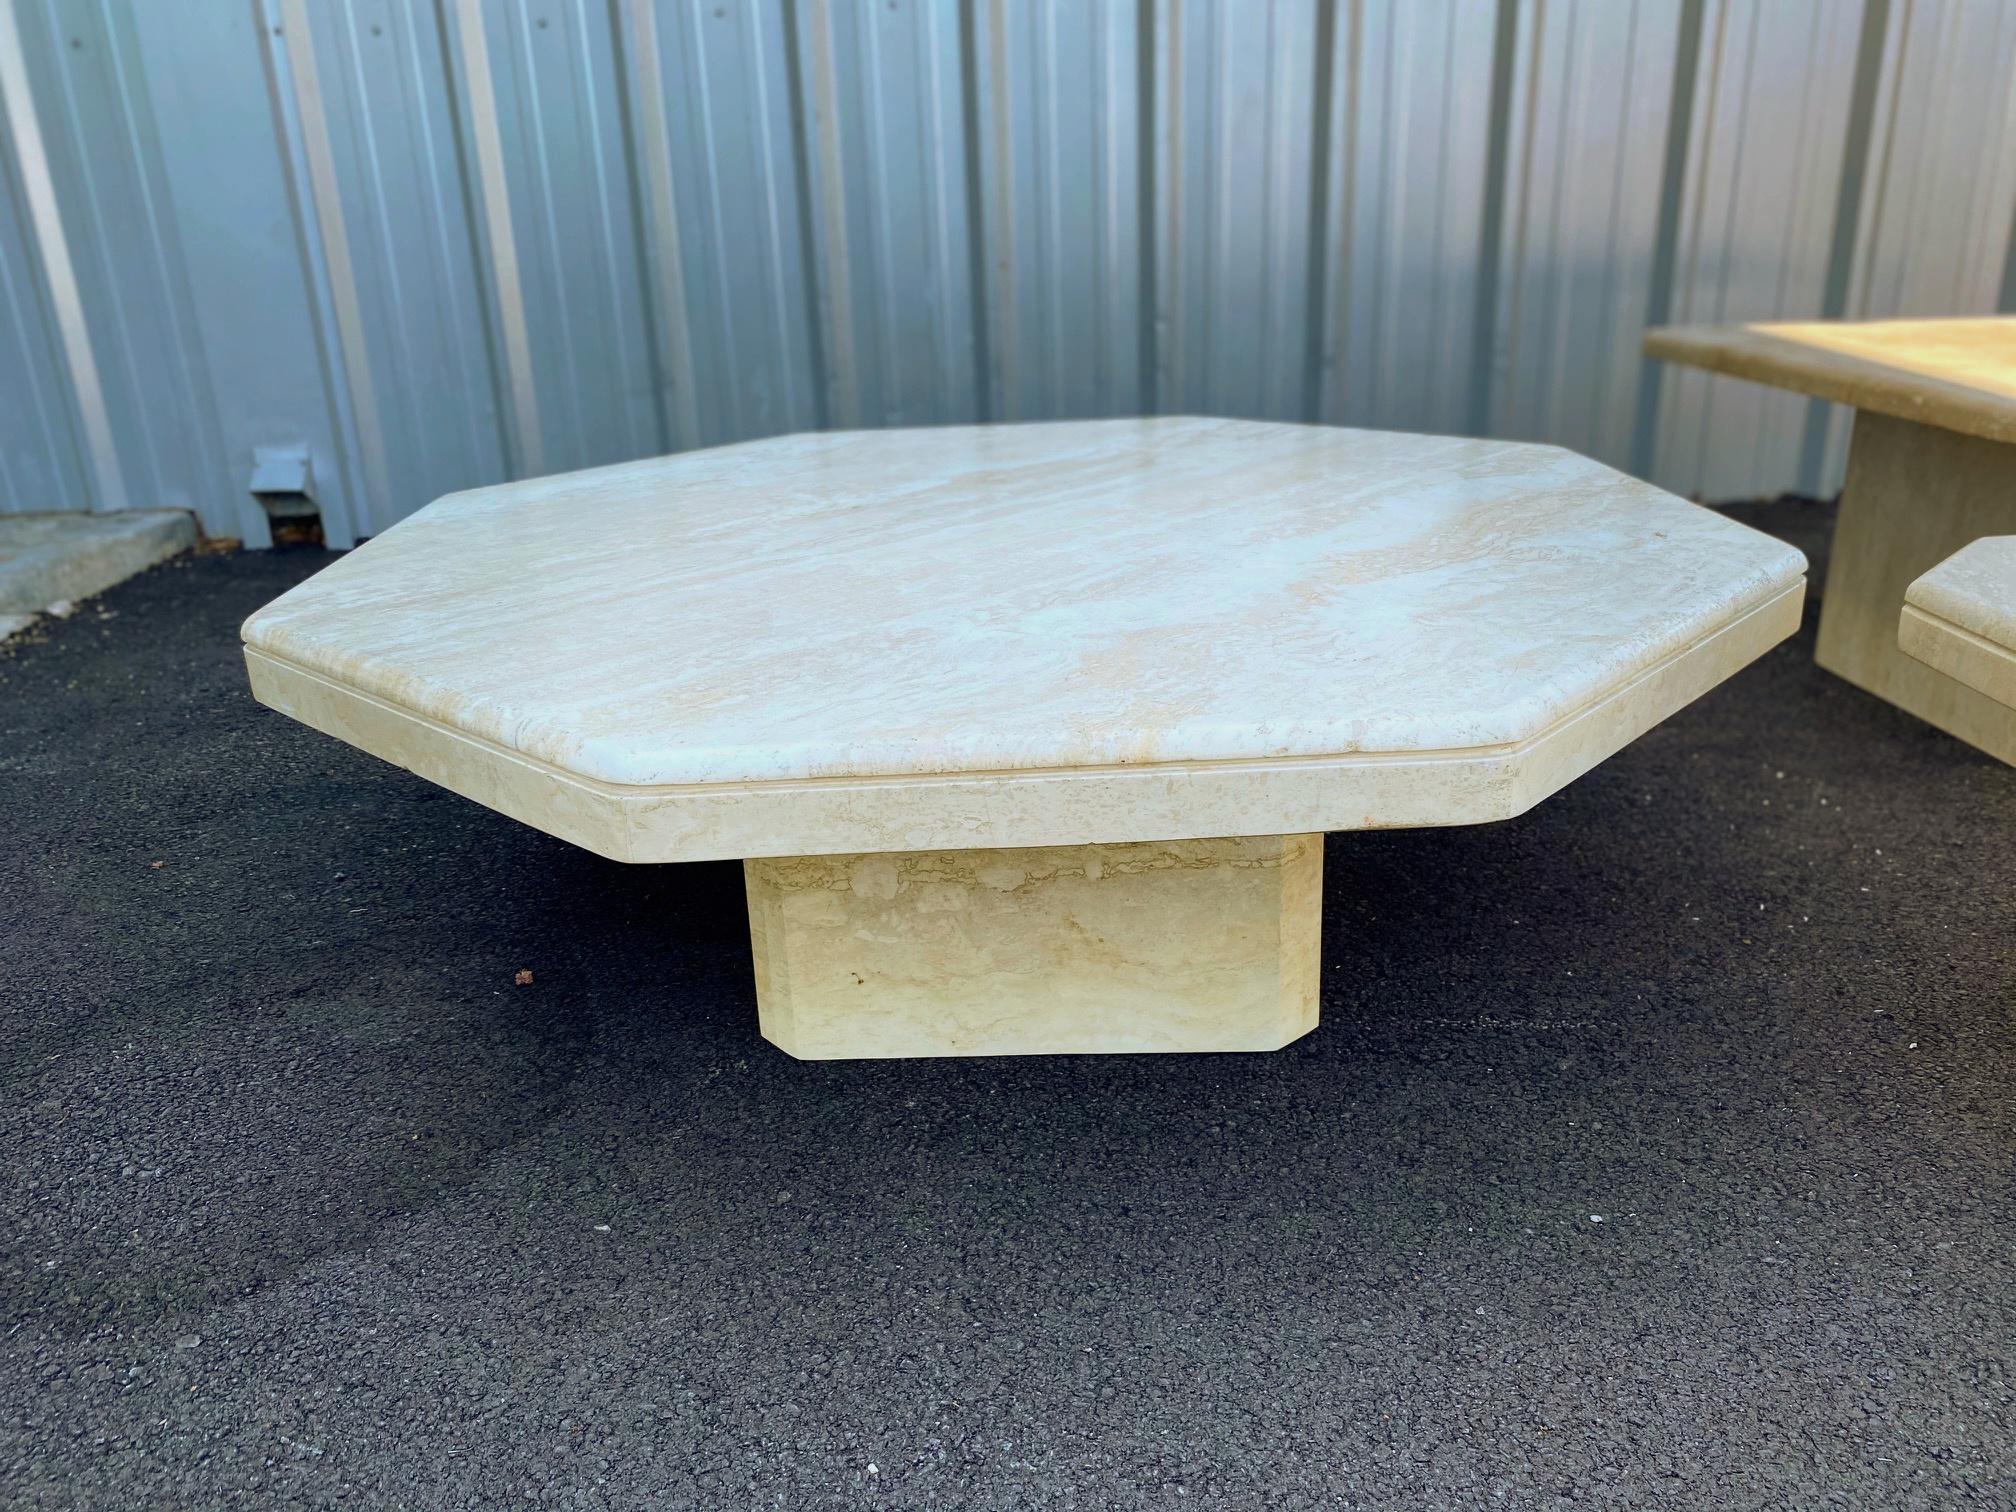 Beautiful Italian travertine octagonal coffee table, circa early 1980s comes in two pieces, pedestal and table top. There are no cracks and coffee table is in good vintage condition. Coloring of the table is shown in natural outdoor light and inside